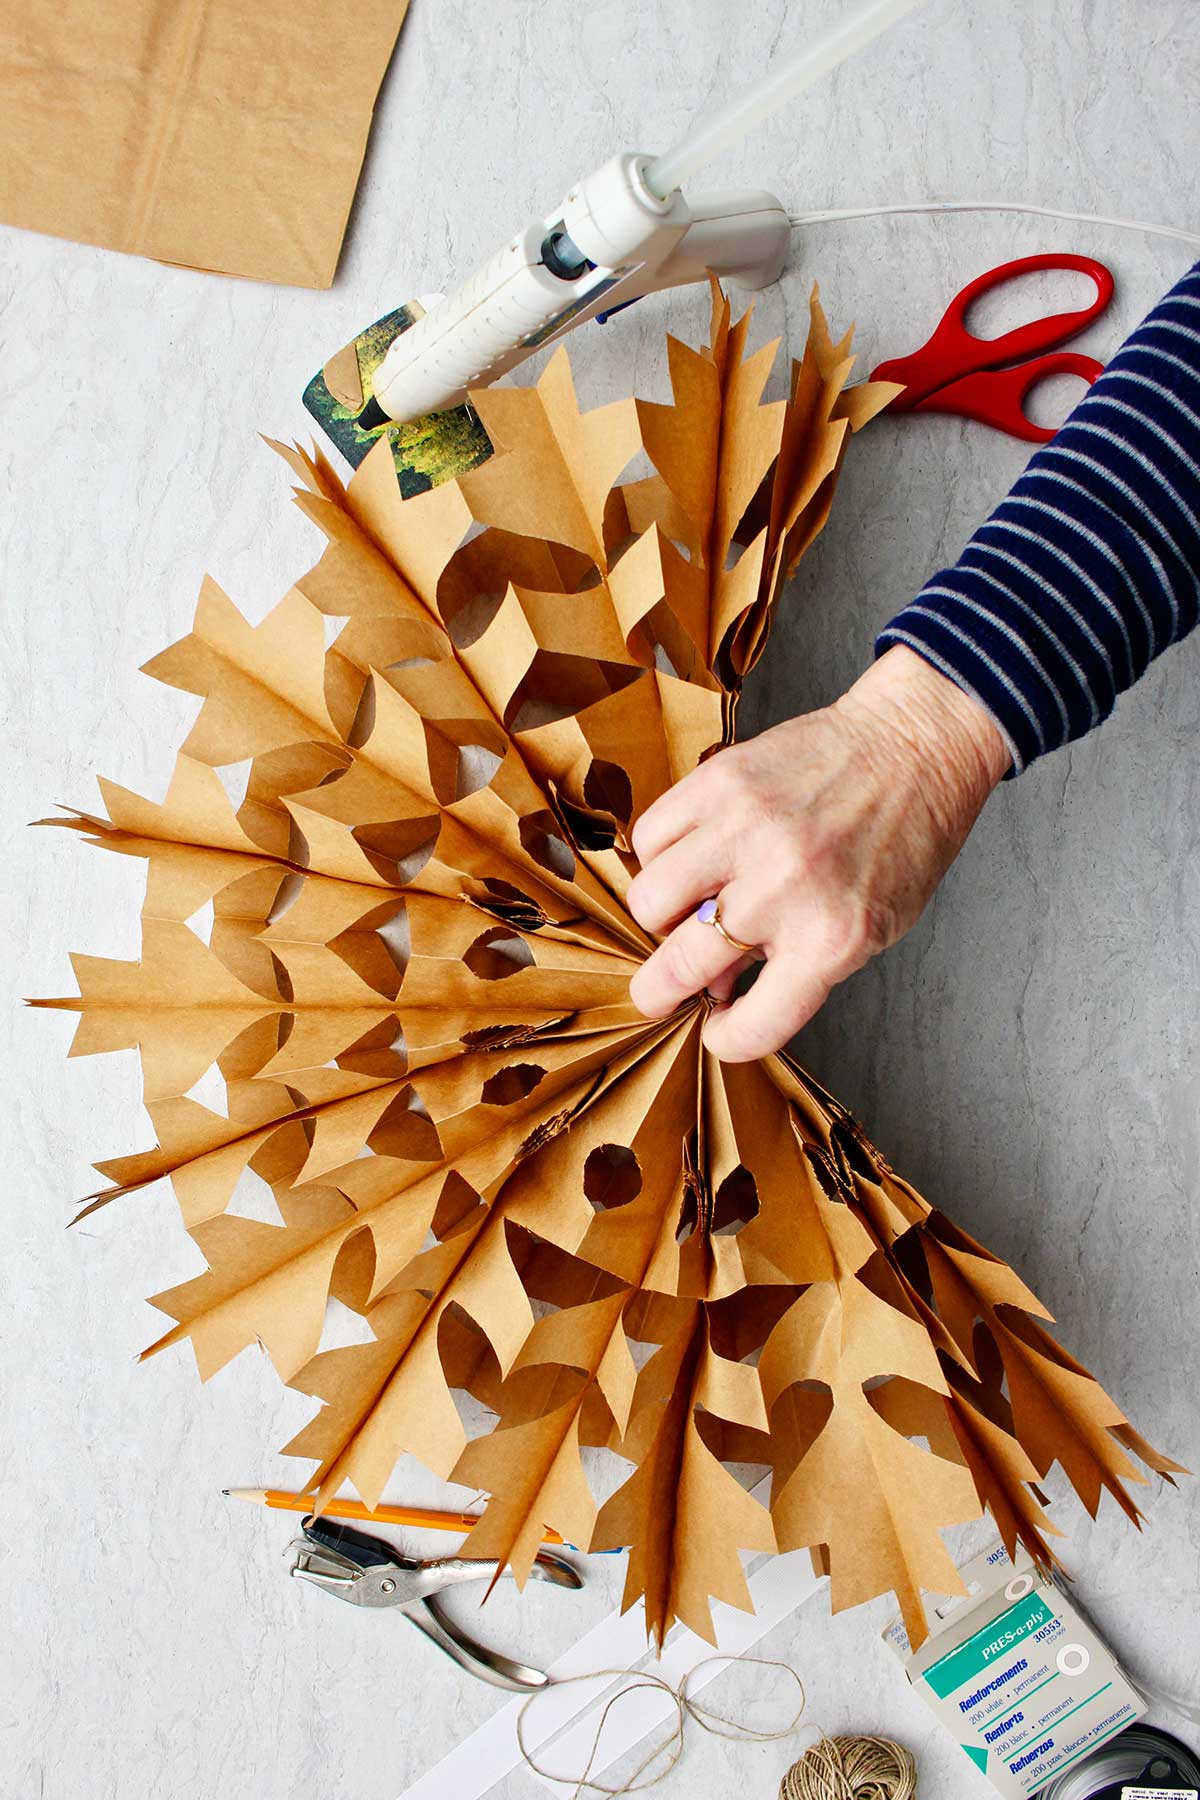 Hand unfolding the brown paper bag snowflake.